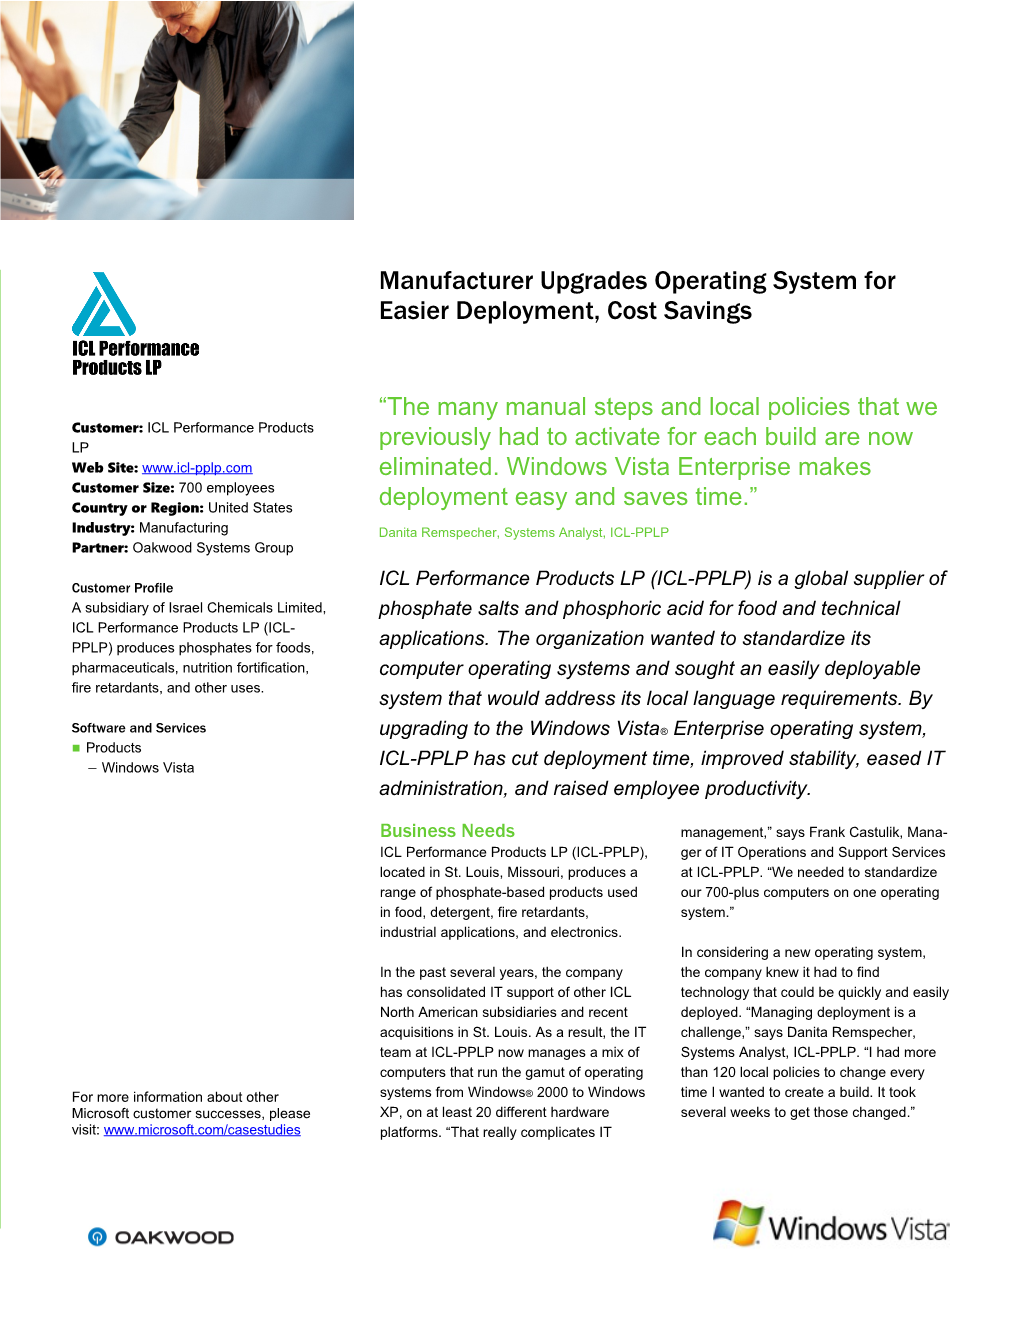 Manufacturer Upgrades Operating System for Easier Deployment, Cost Savings